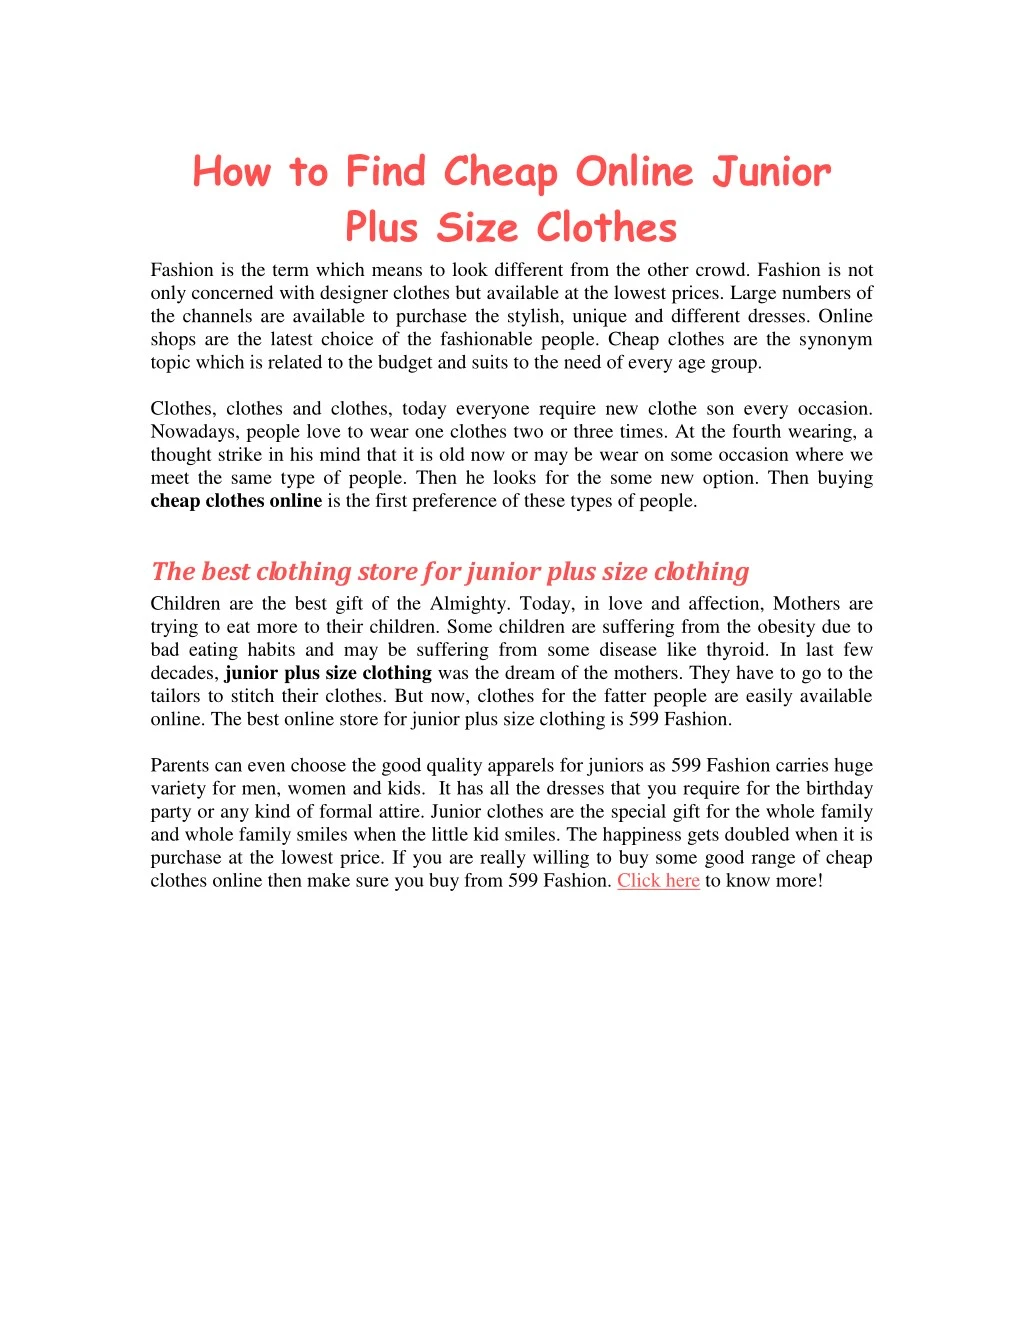 how to find cheap online junior plus size clothes